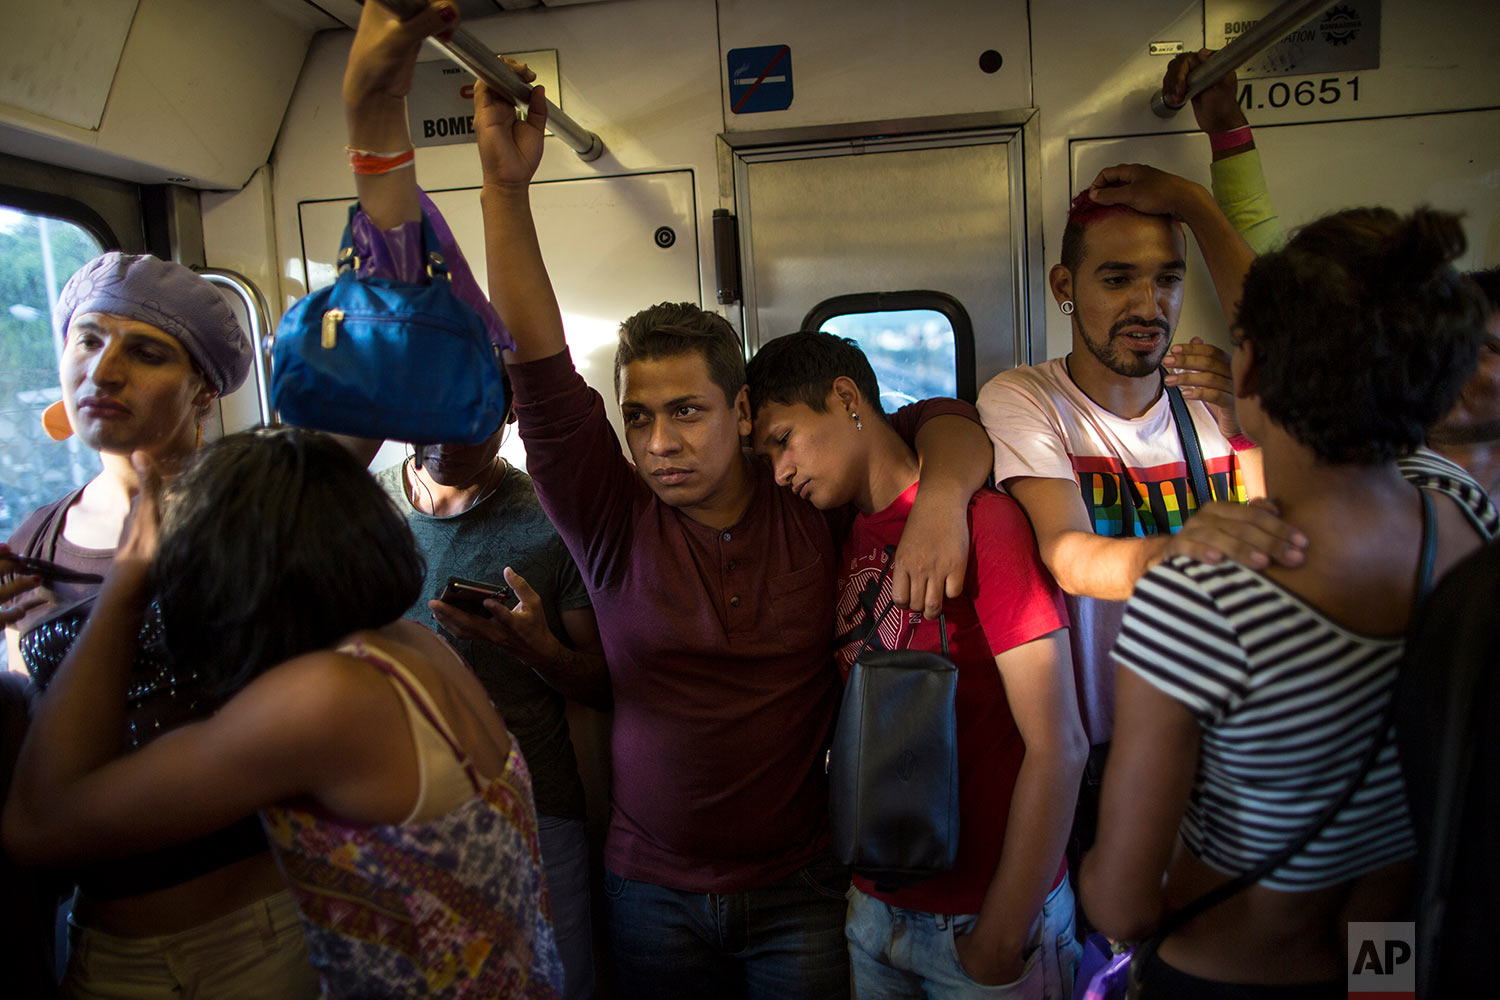  In this Nov. 8, 2018 photo, members of a group of 50 or so LGBTQ migrants traveling with the migrant caravan hoping to reach the U.S. border, ride the subway during a rest day, to the historic center in Mexico City. (AP Photo/Rodrigo Abd)
 